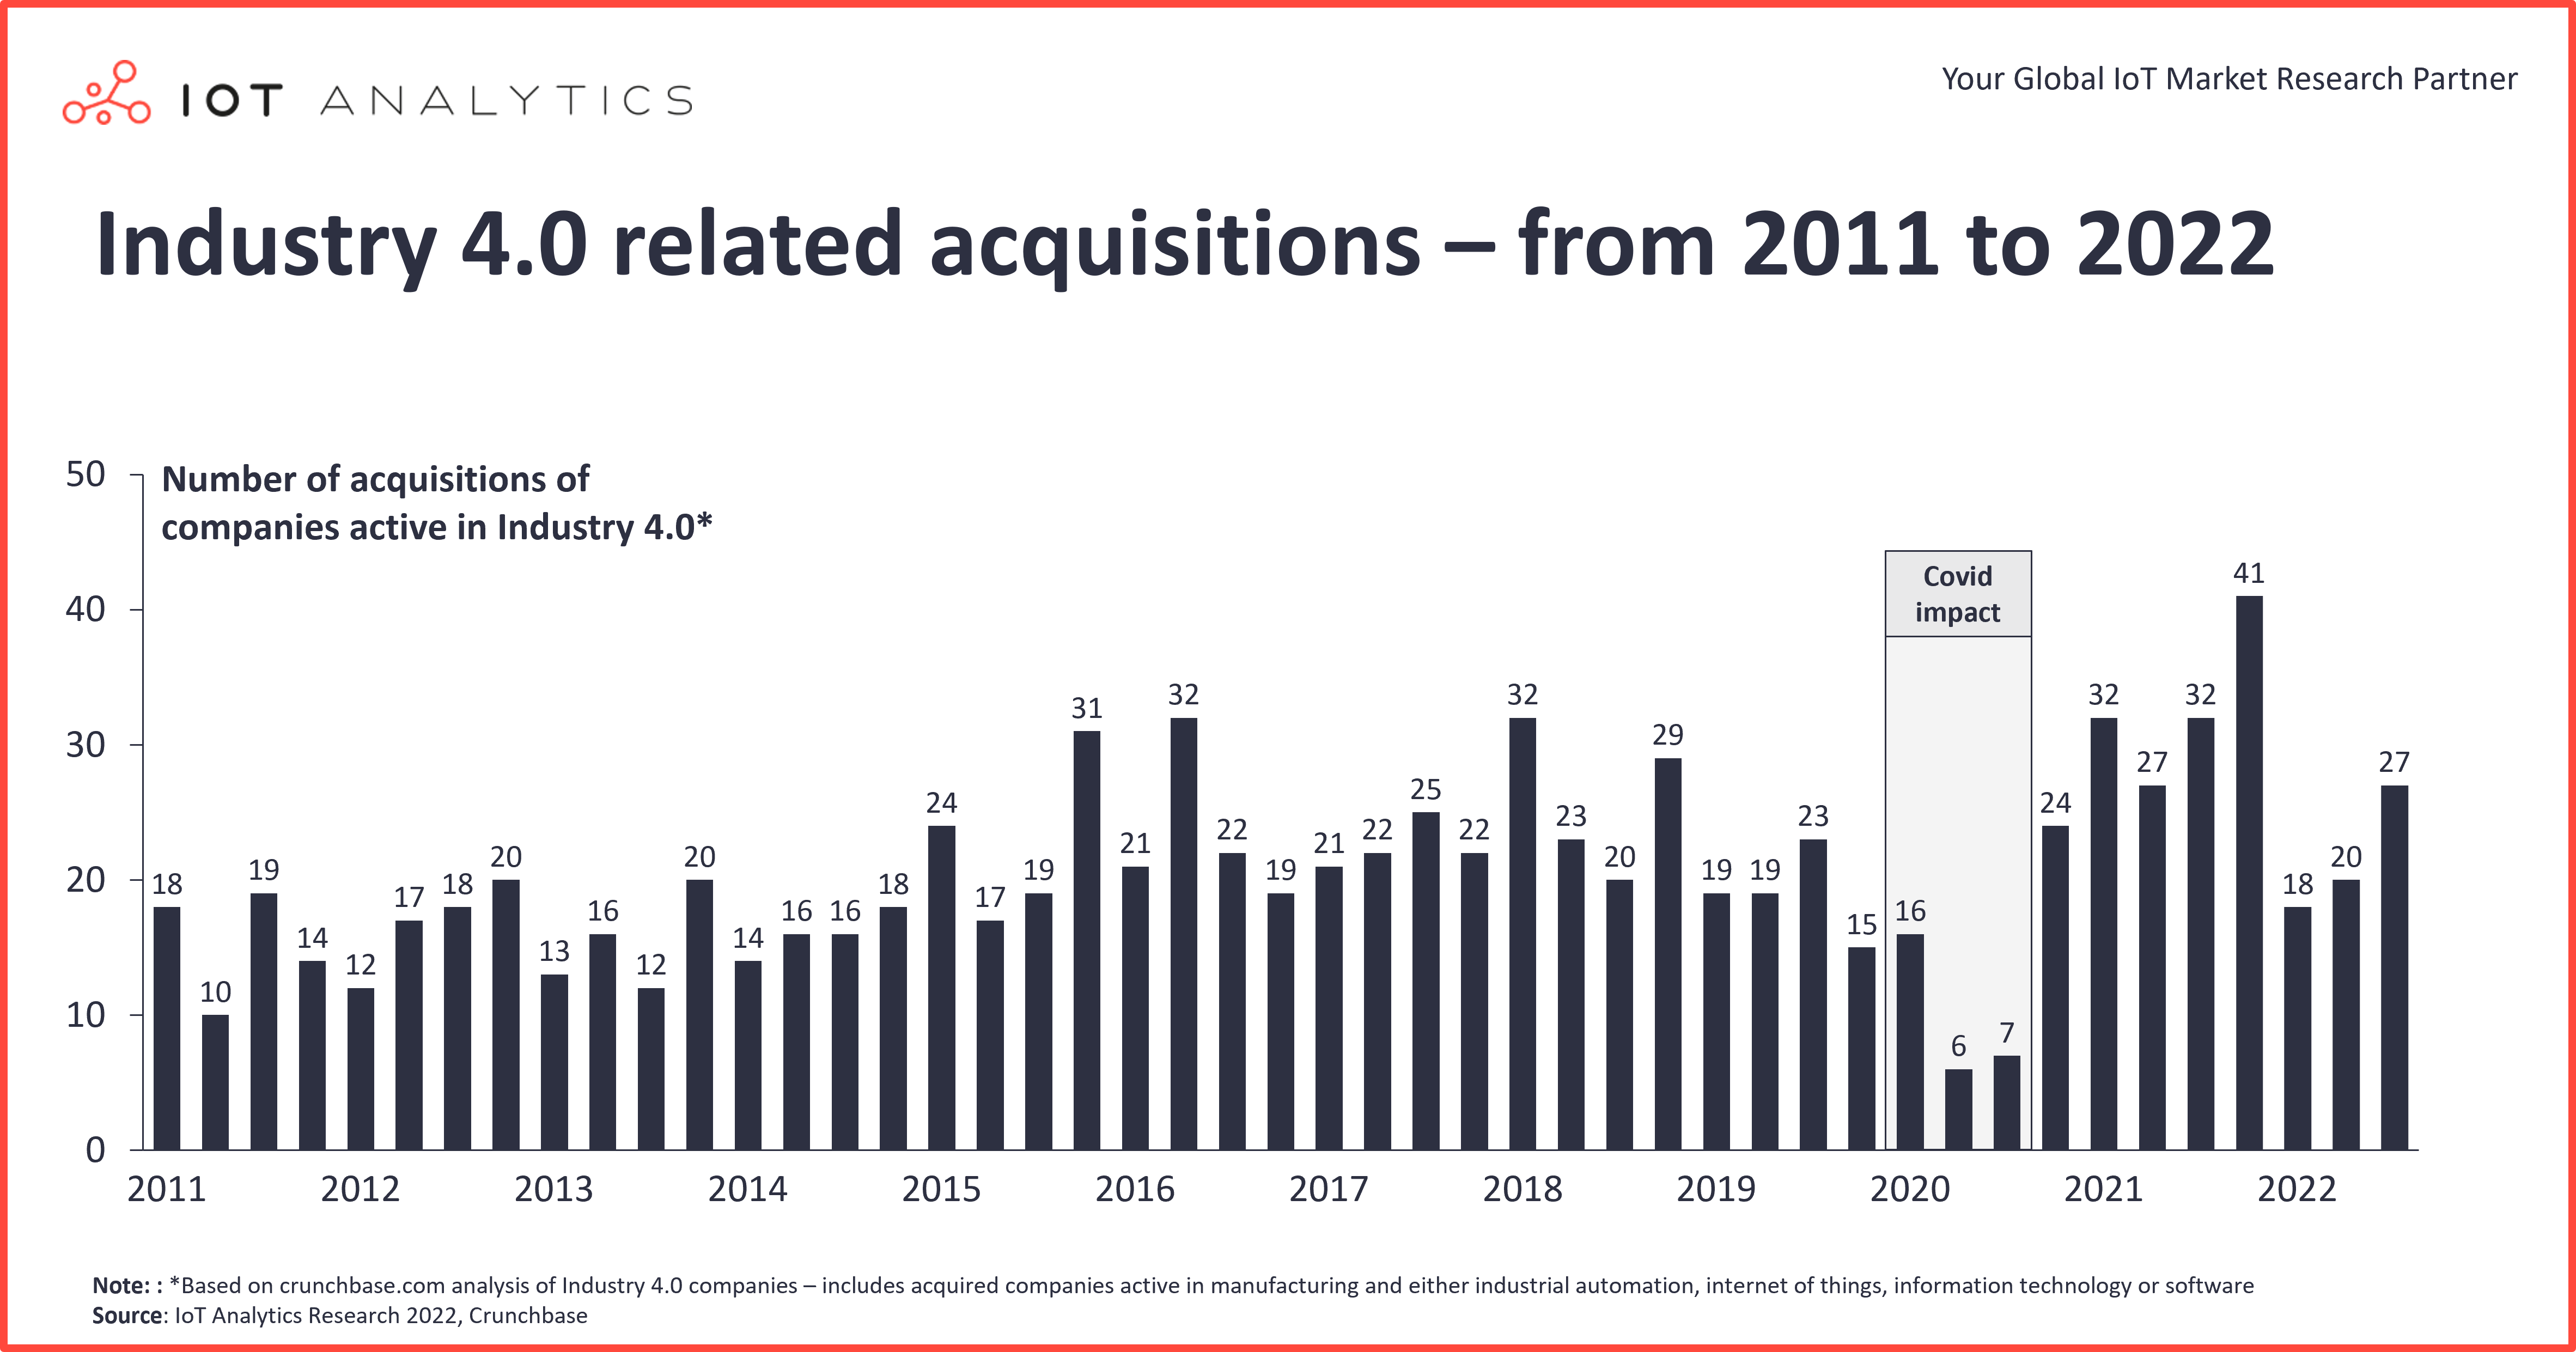 Industry 4.0 related acquisitions from 2011 to 2022